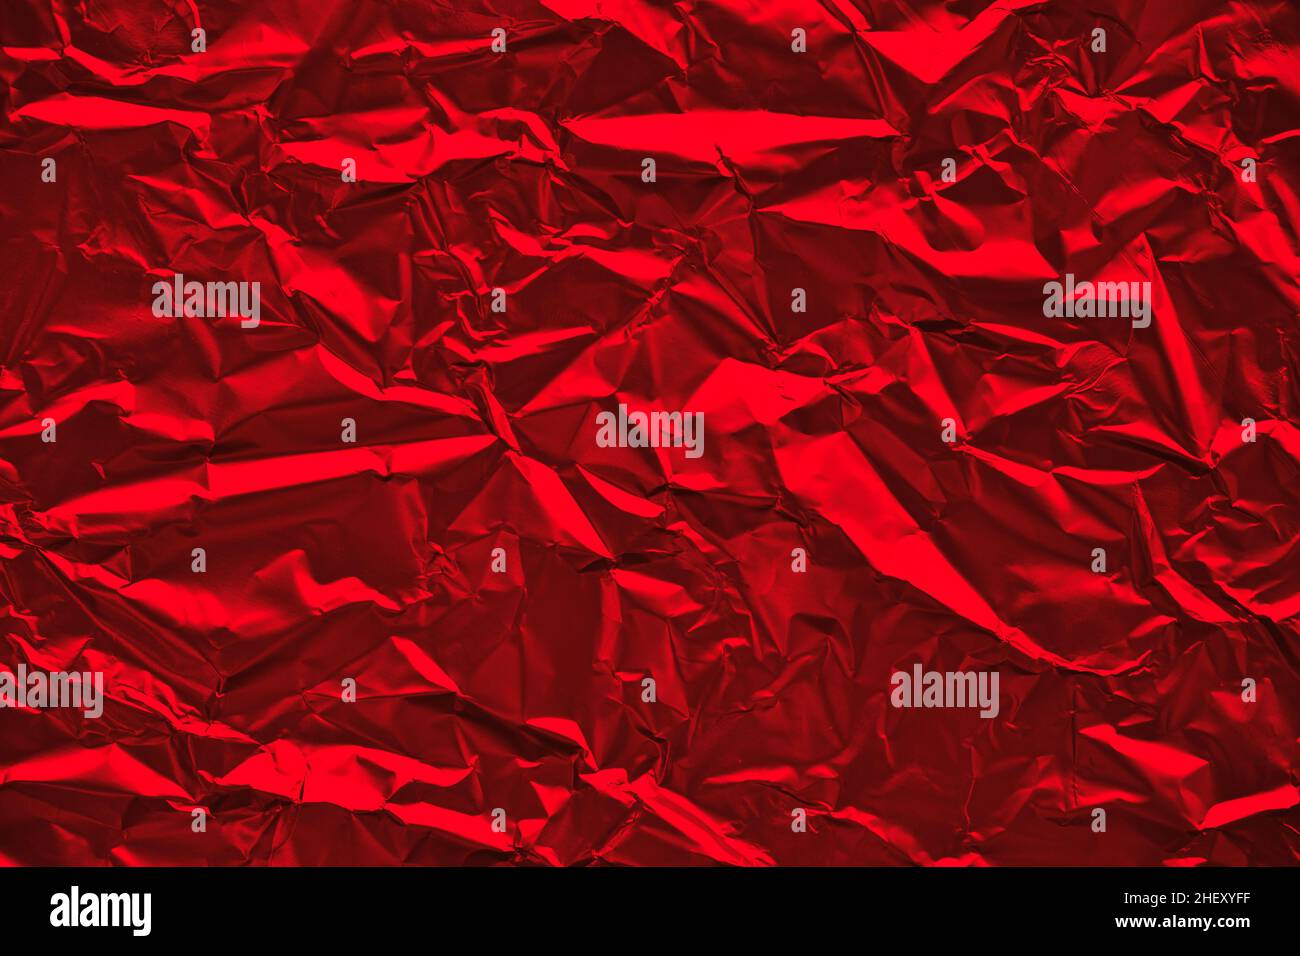 Close-up of crumpled silver aluminum foil texture in red tone. Abstract background for design. Stock Photo